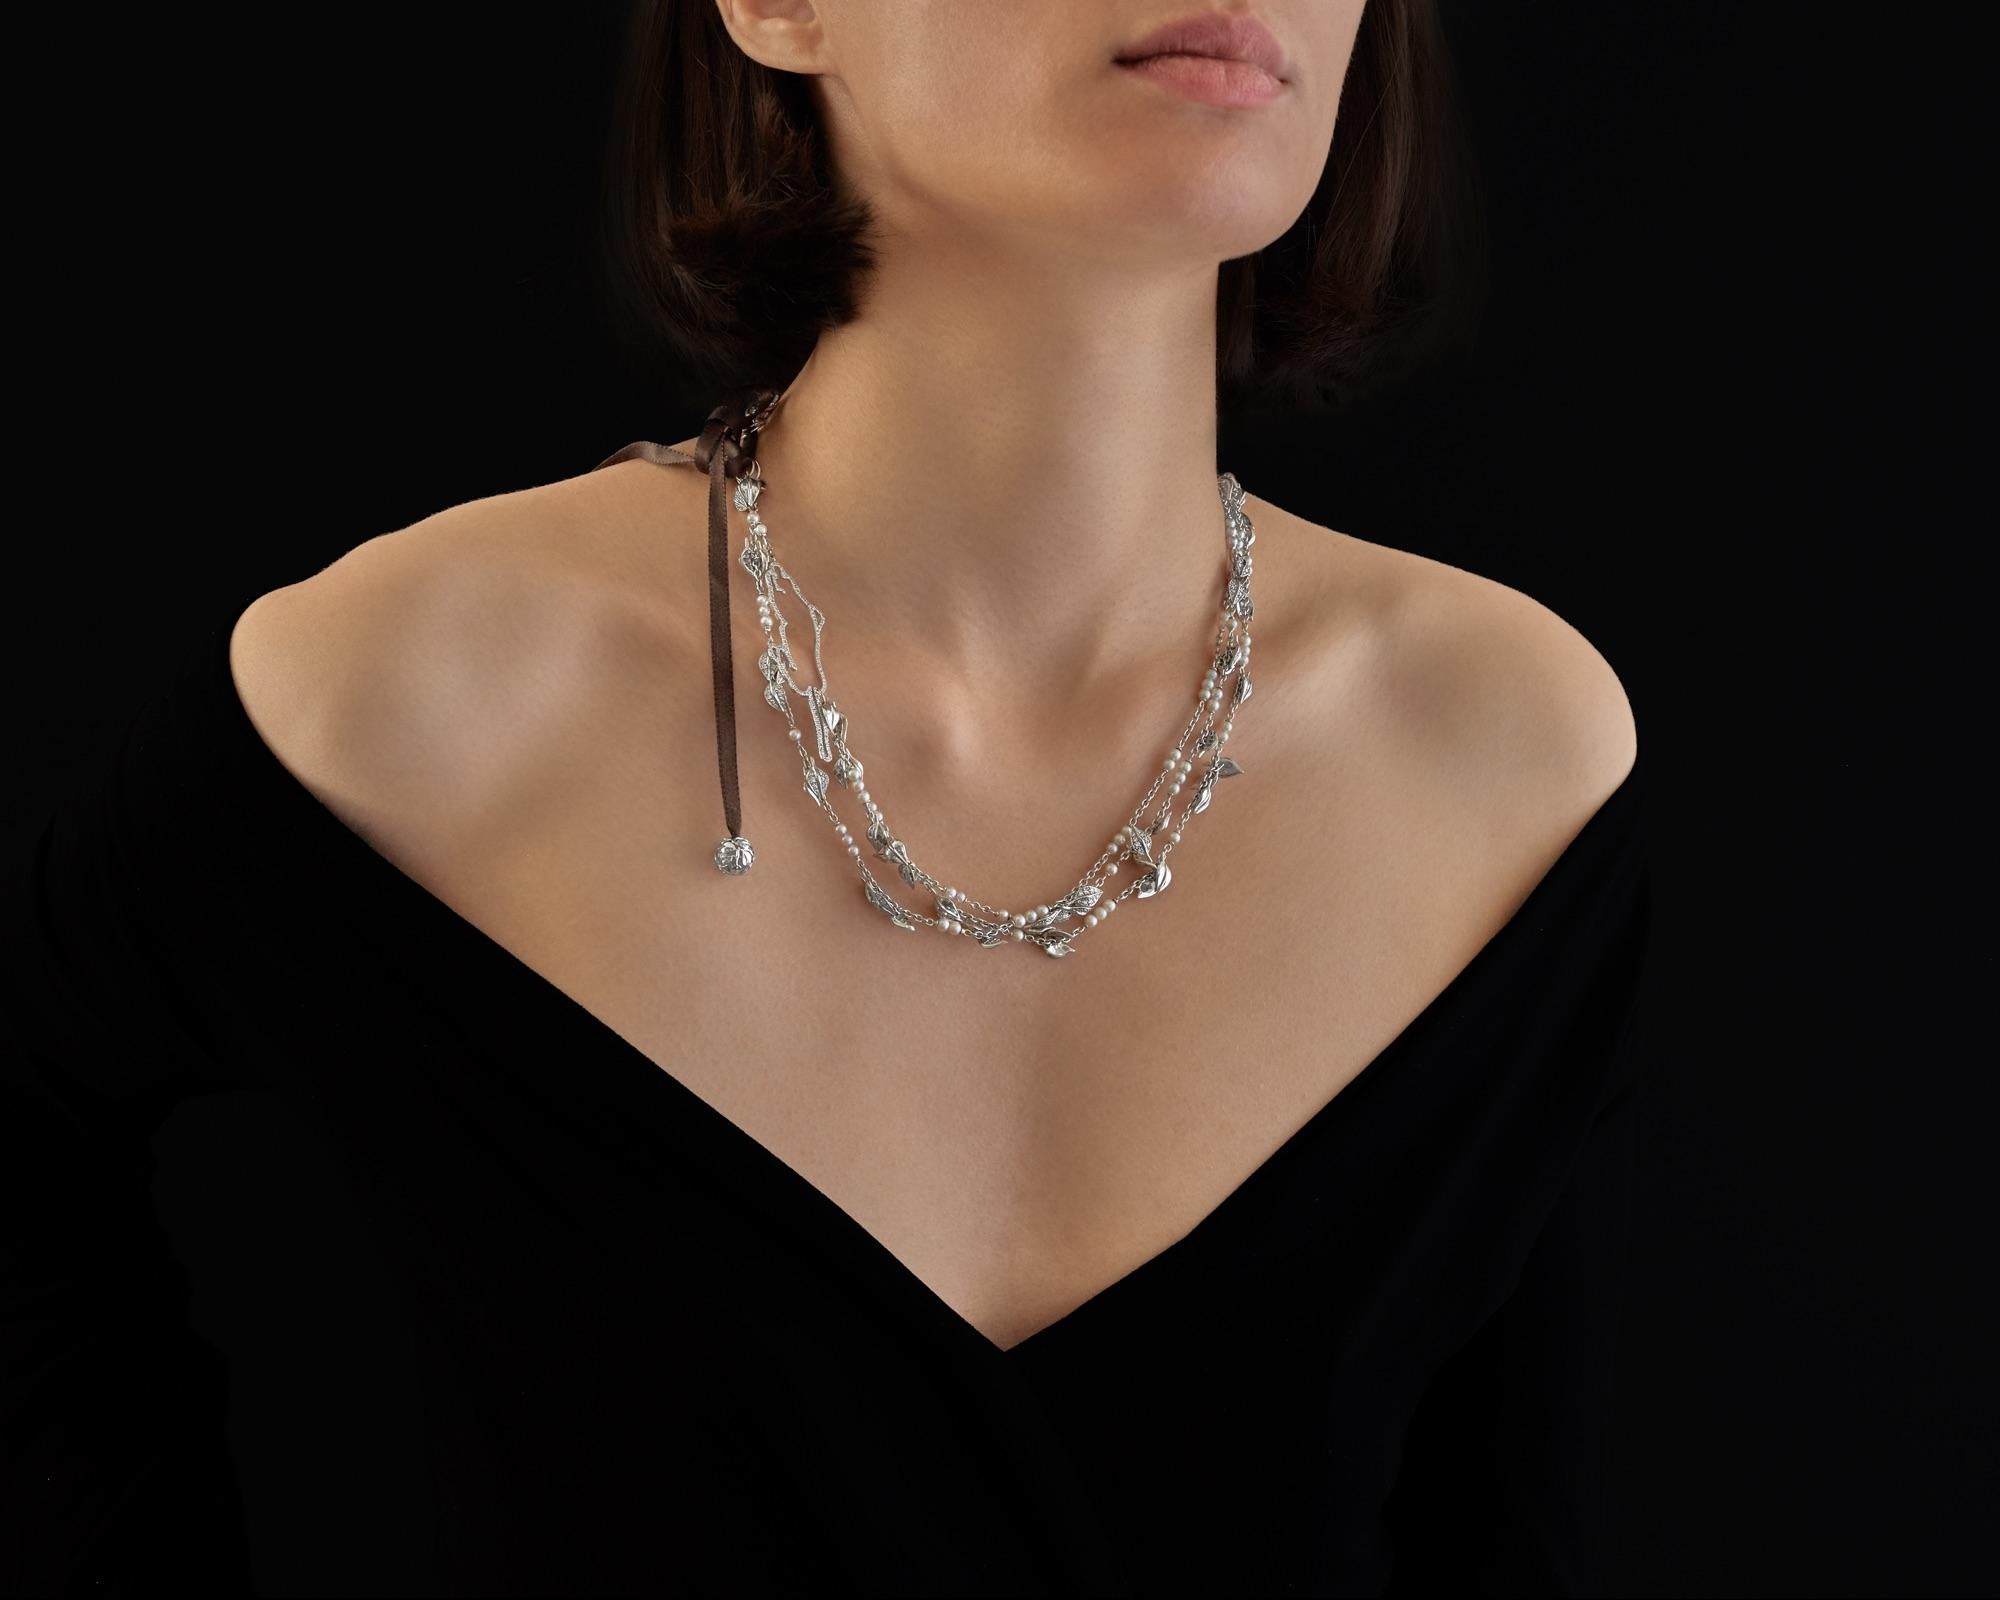 Handcrafted in France in our High Jewelry Paris workshop. Designed by Édéenne, artist and founder of Maison Édéenne, this delicate transformable long necklace can be worn at different lengths (16.53 inch / 42 cm or 31.5 inch / 80 cm), or even in the